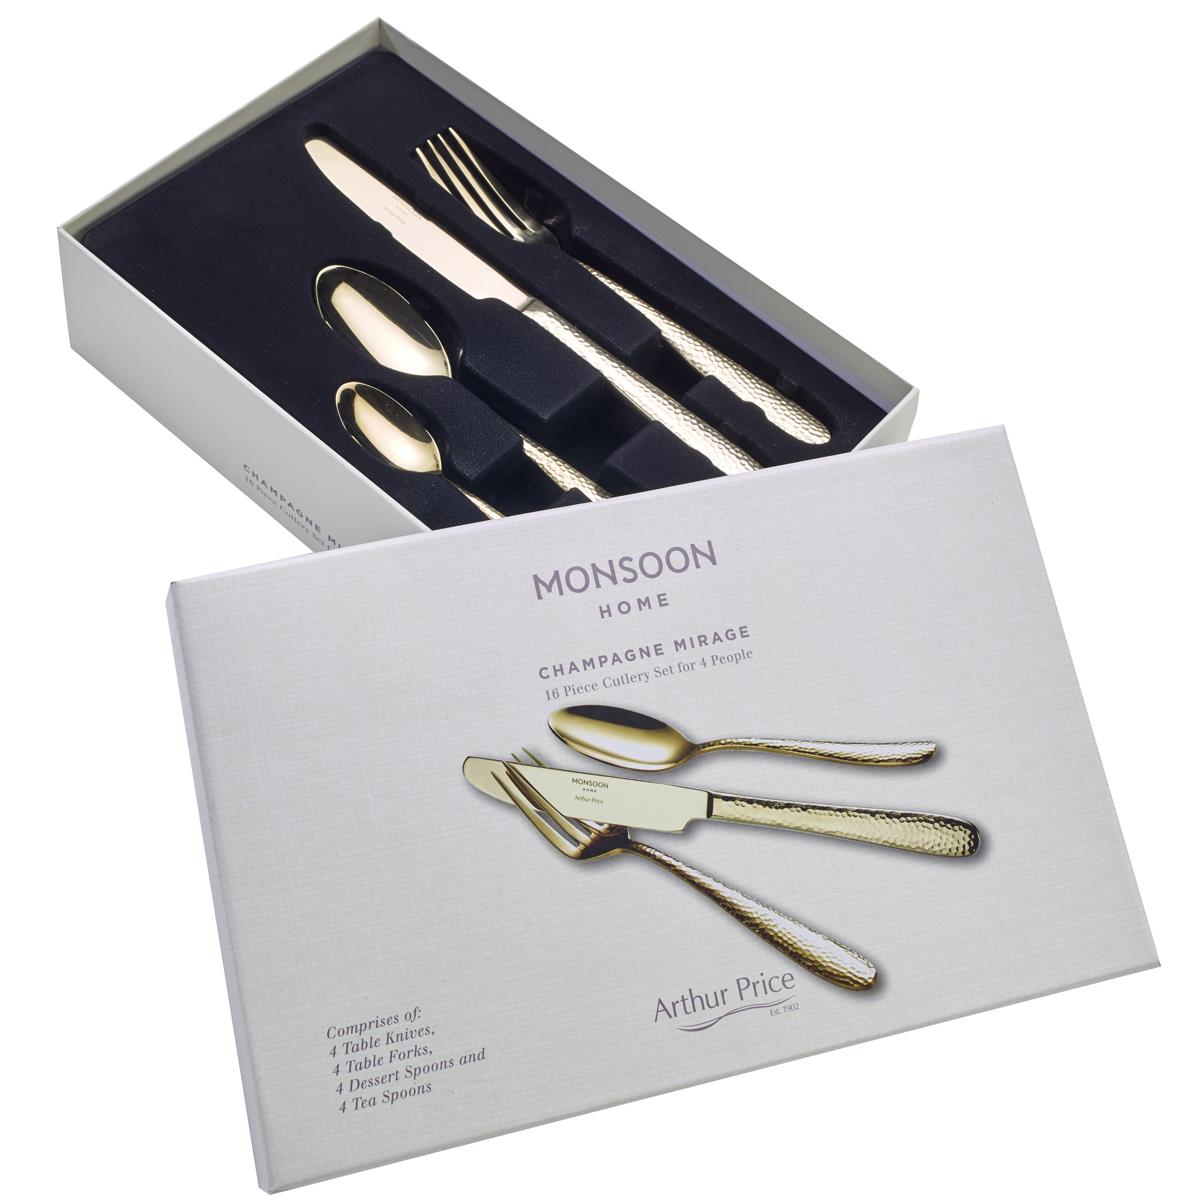 What are the lengths of the knives and forks in the Arthur Price Monsoon Champagne Mirage 16 Piece set please?